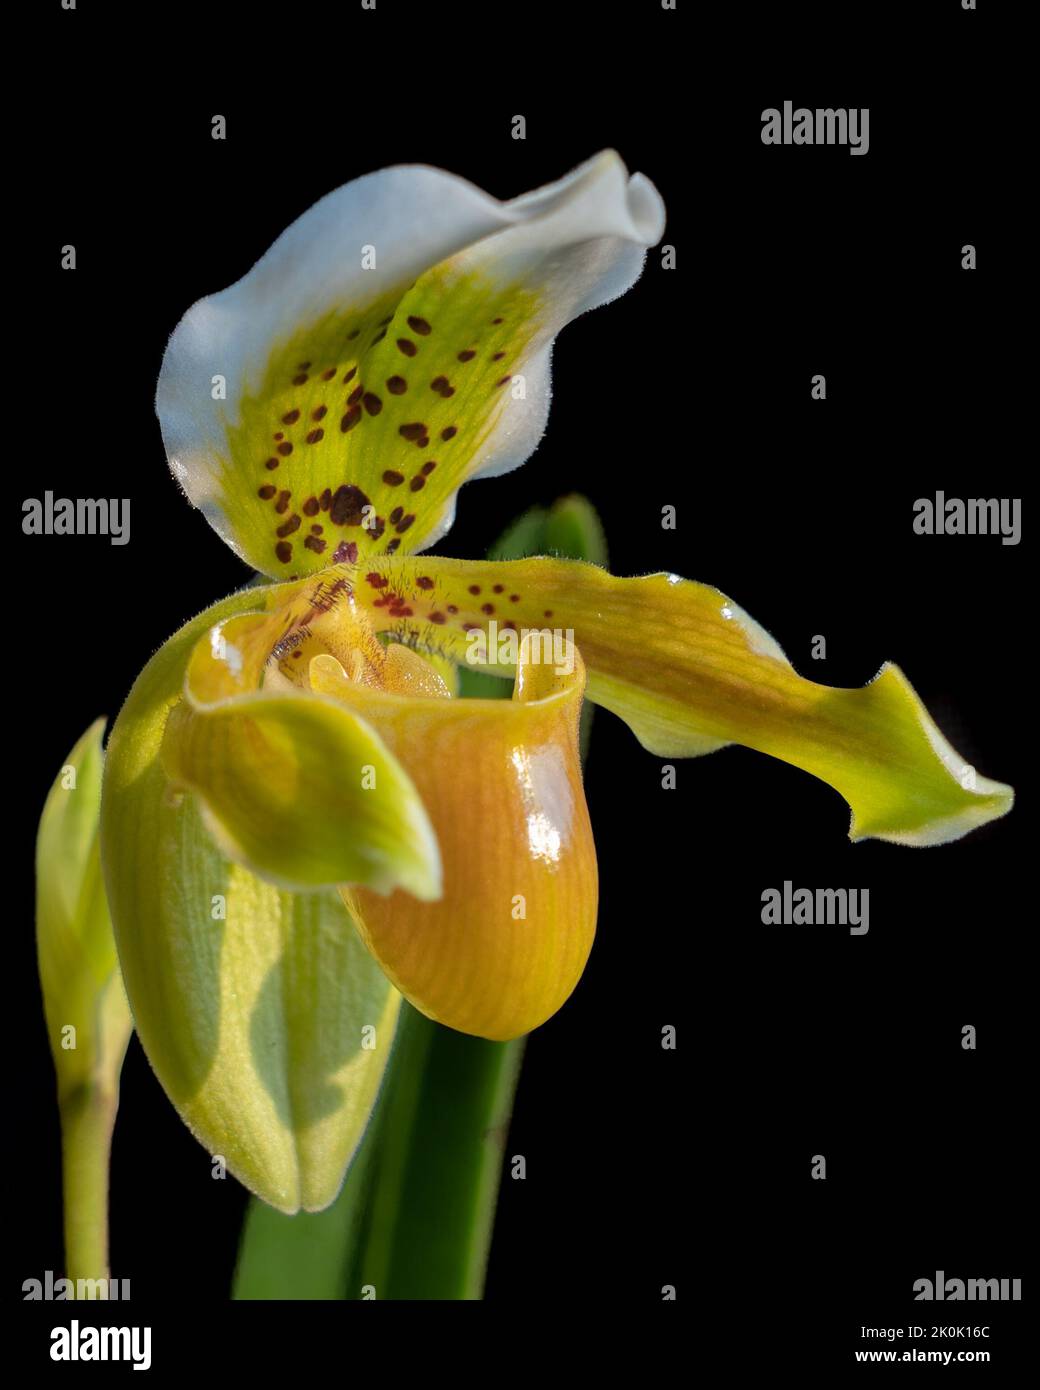 Closeup view of bright yellow green and white flower of lady slipper orchid species paphiopedilum exul on black background Stock Photo